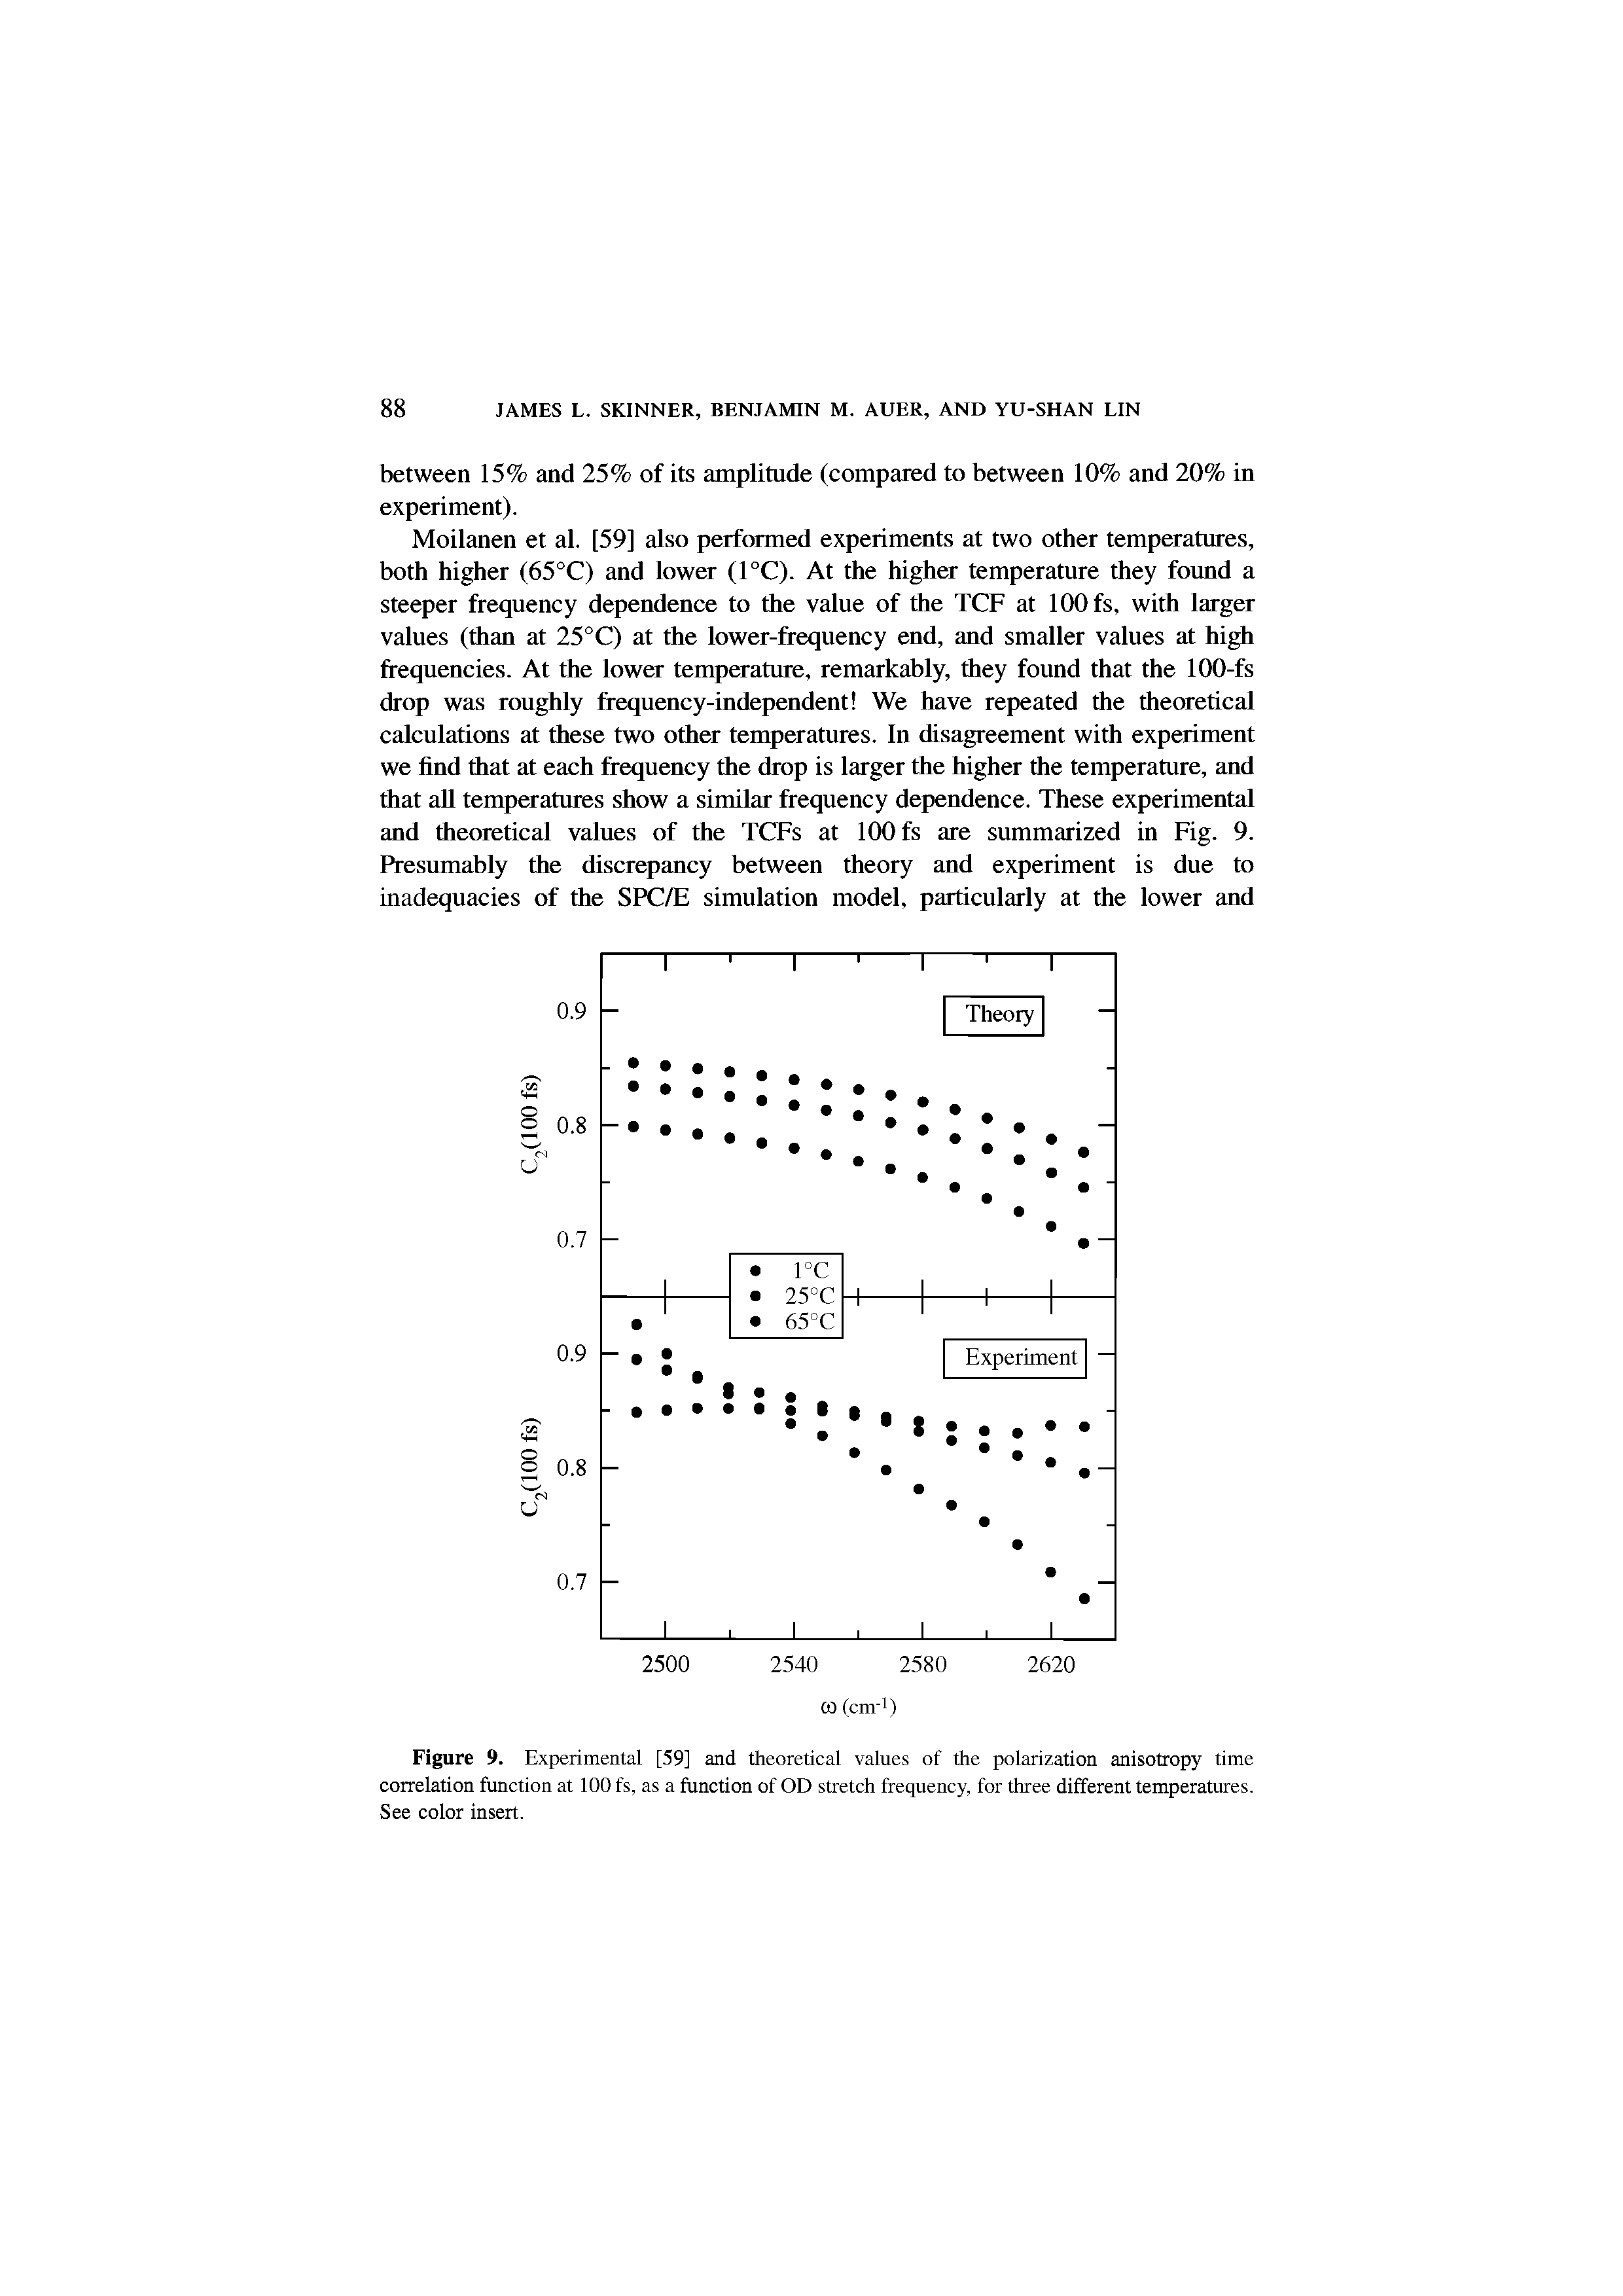 Figure 9. Experimental [59] and theoretical values of the polarization anisotropy time correlation function at 100 fs, as a function of OD stretch frequency, for three different temperatures. See color insert.